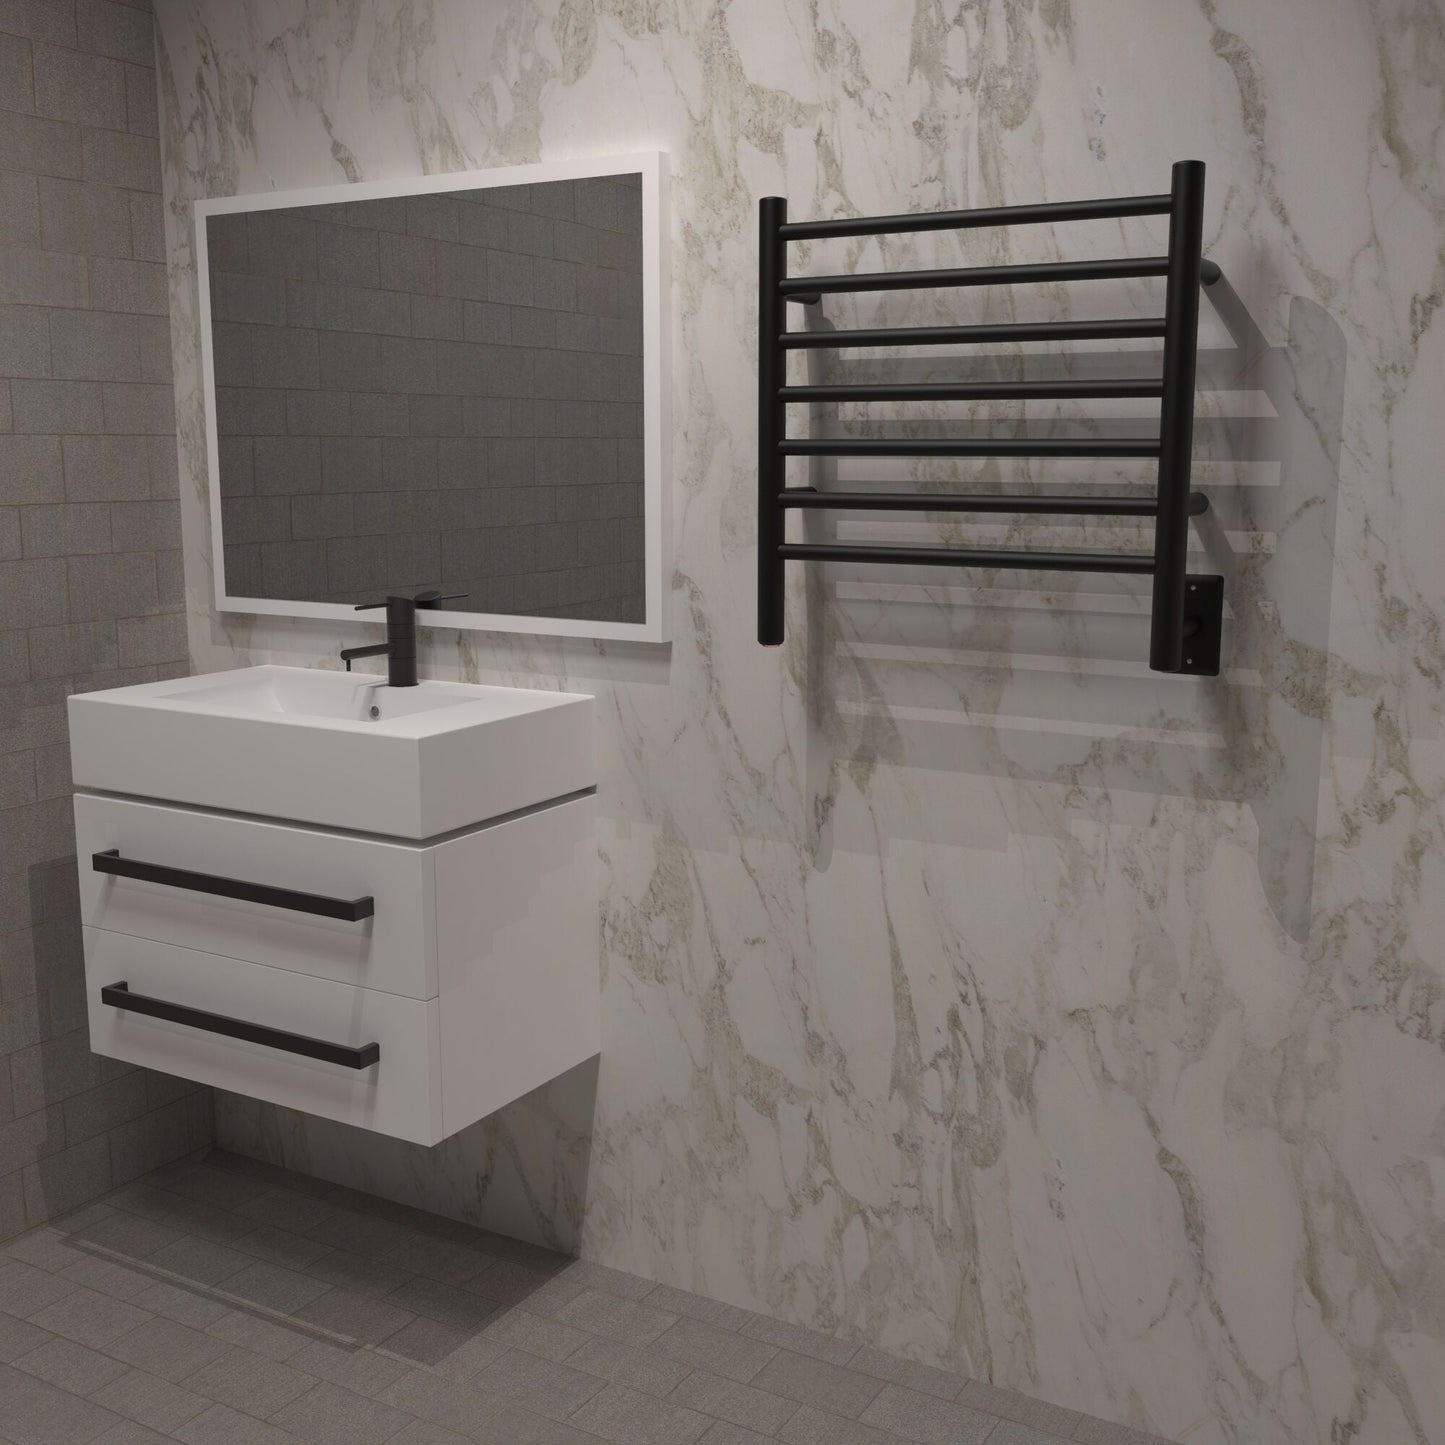 Amba Radiant Small Straight Hardwired or Plug-In Wall Mounted Towel Warmer - 20.375"w x 21.25"h